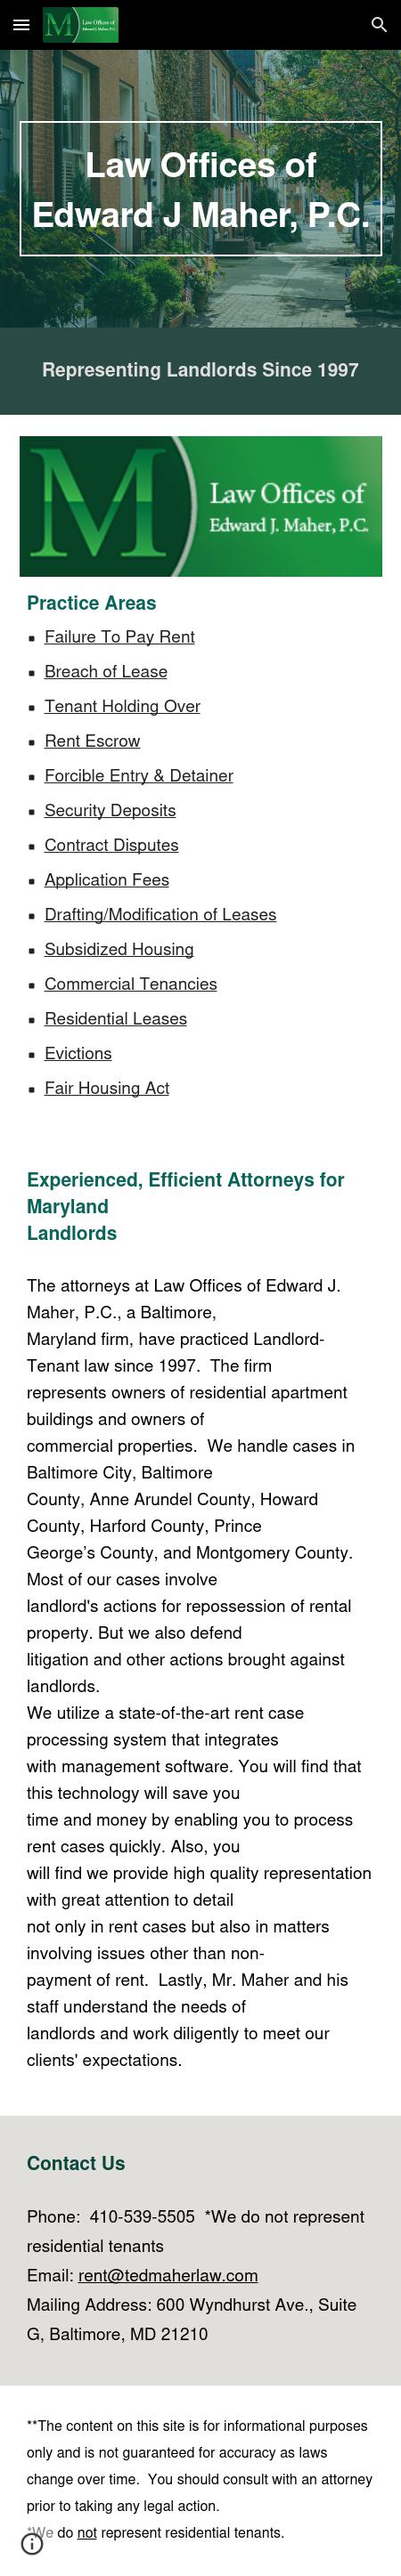 Law Offices of Edward J. Maher, P.C. - Laurel MD Lawyers